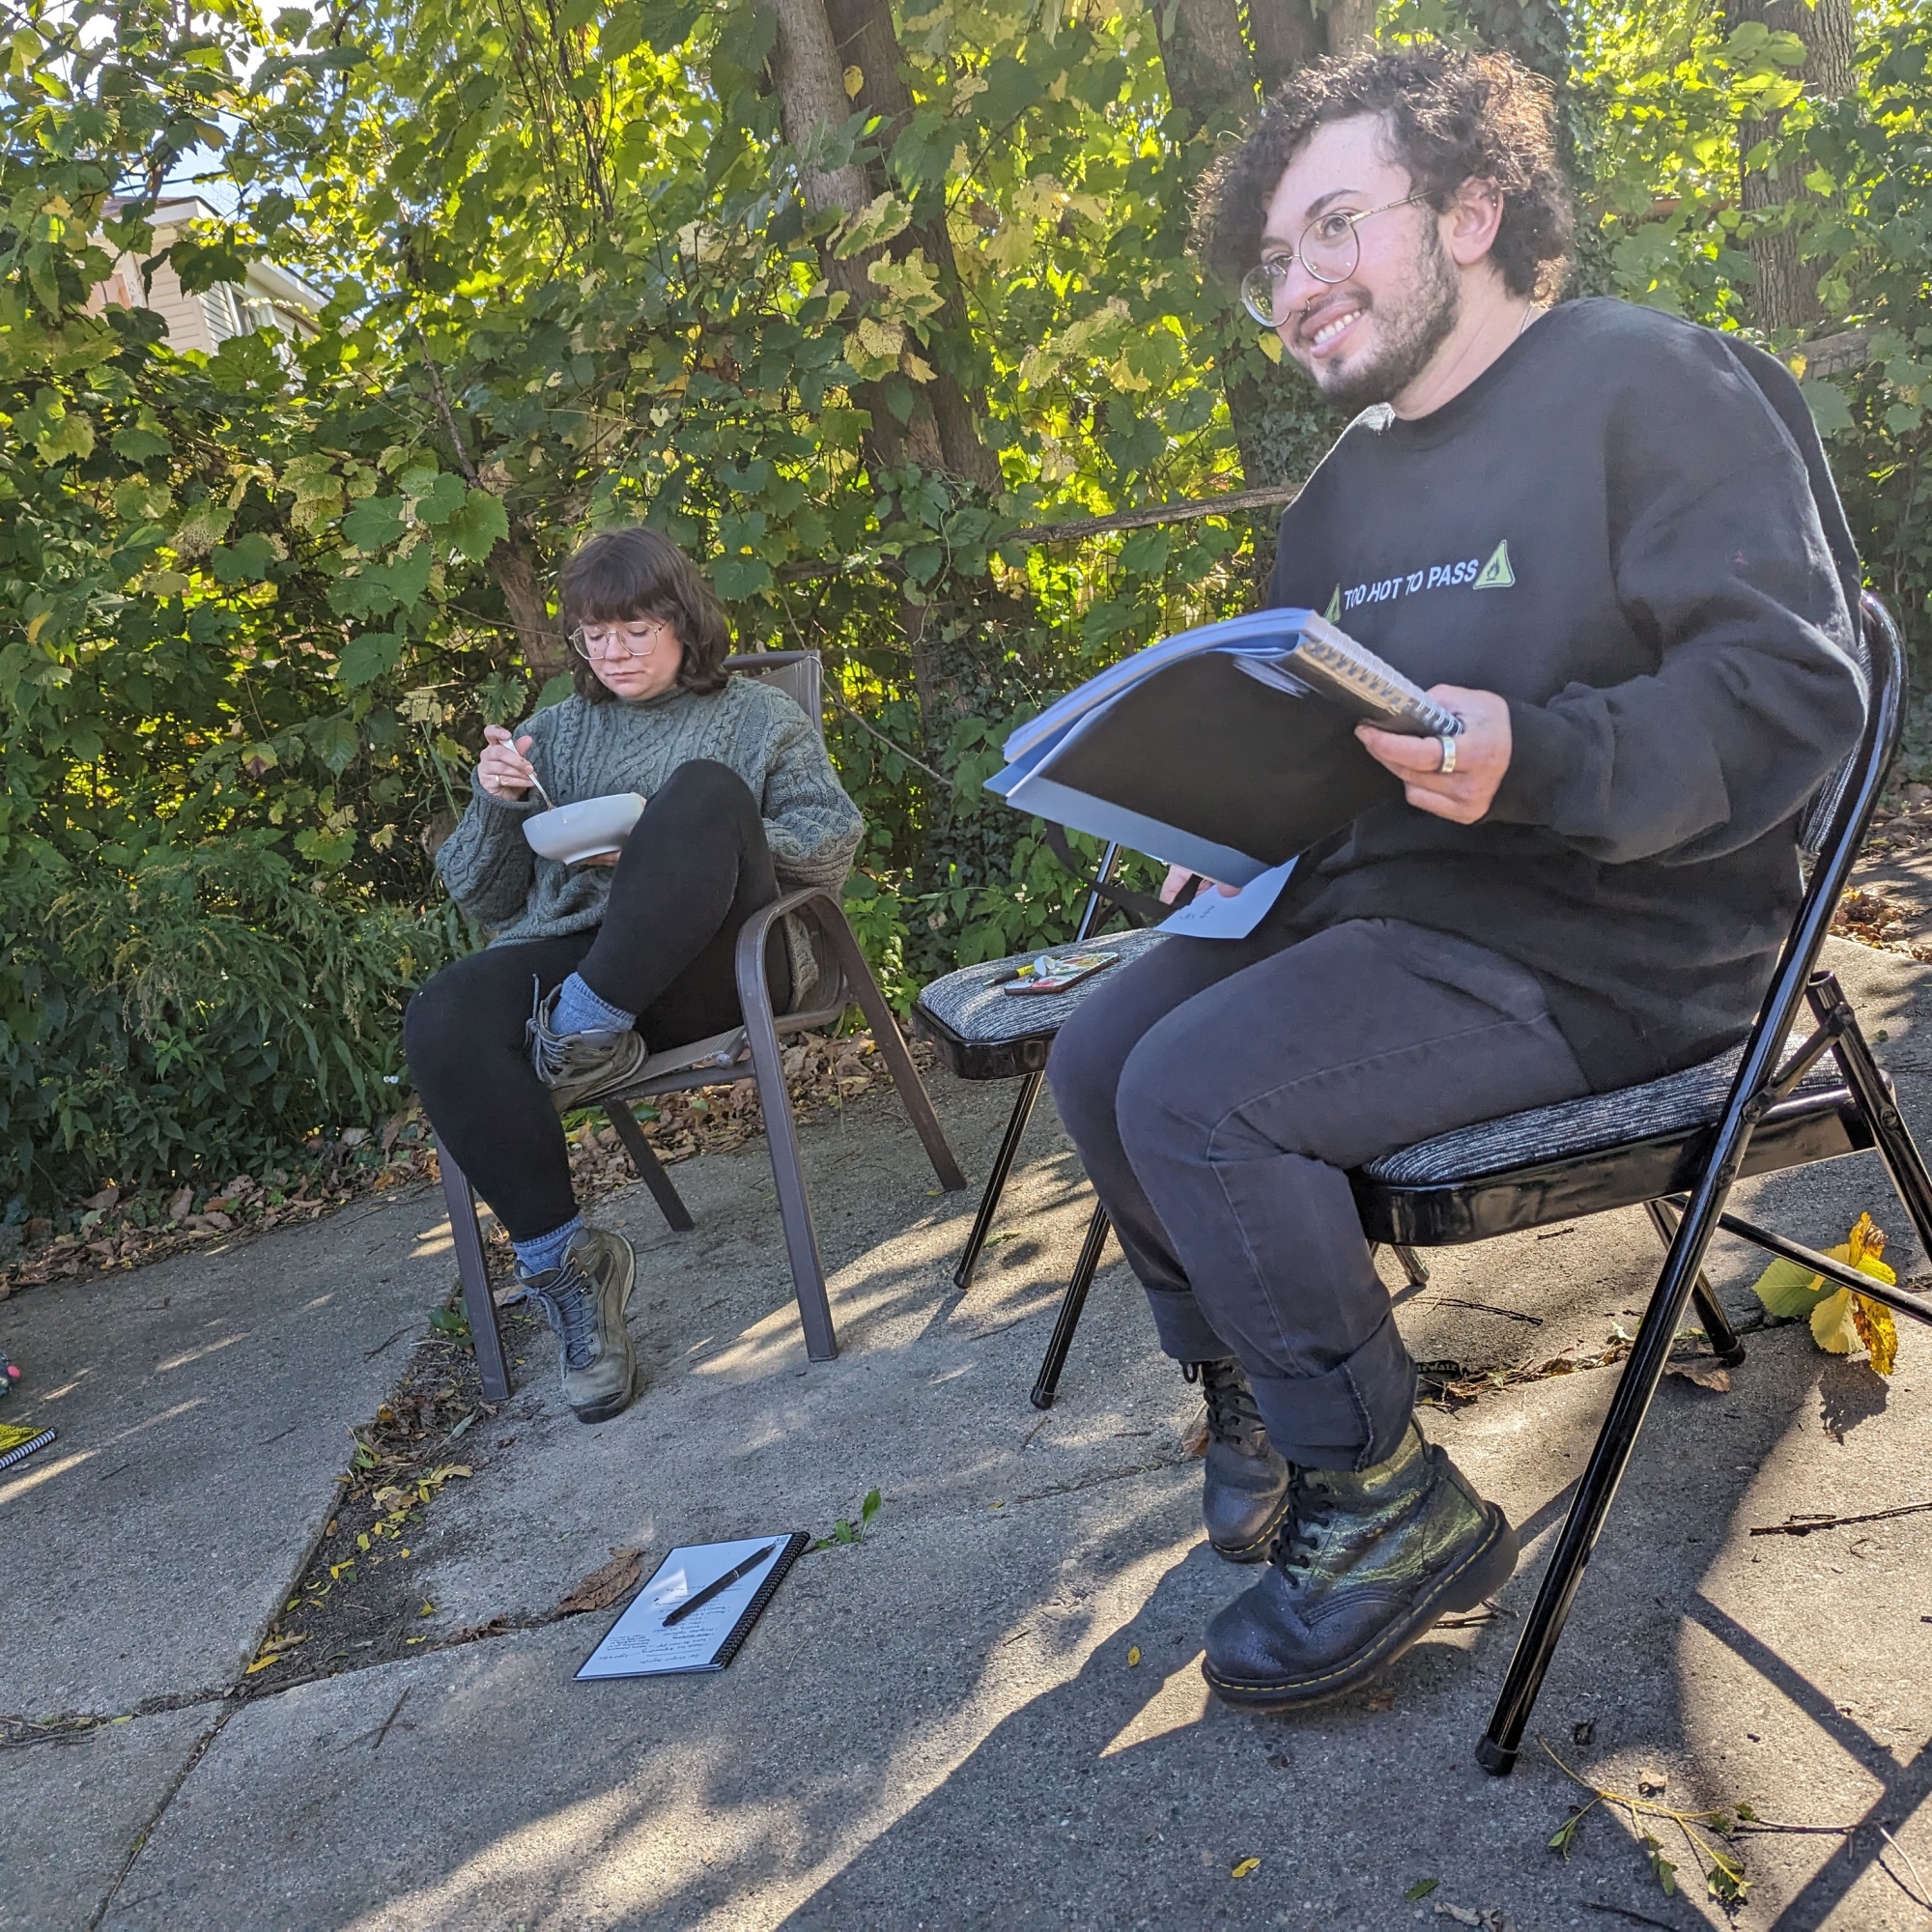 A photo of Grey and Erin, two members of Detroit Peer Respite, sitting on folding chairs. Grey is writing in a notebook while Erin eats from a bowl.